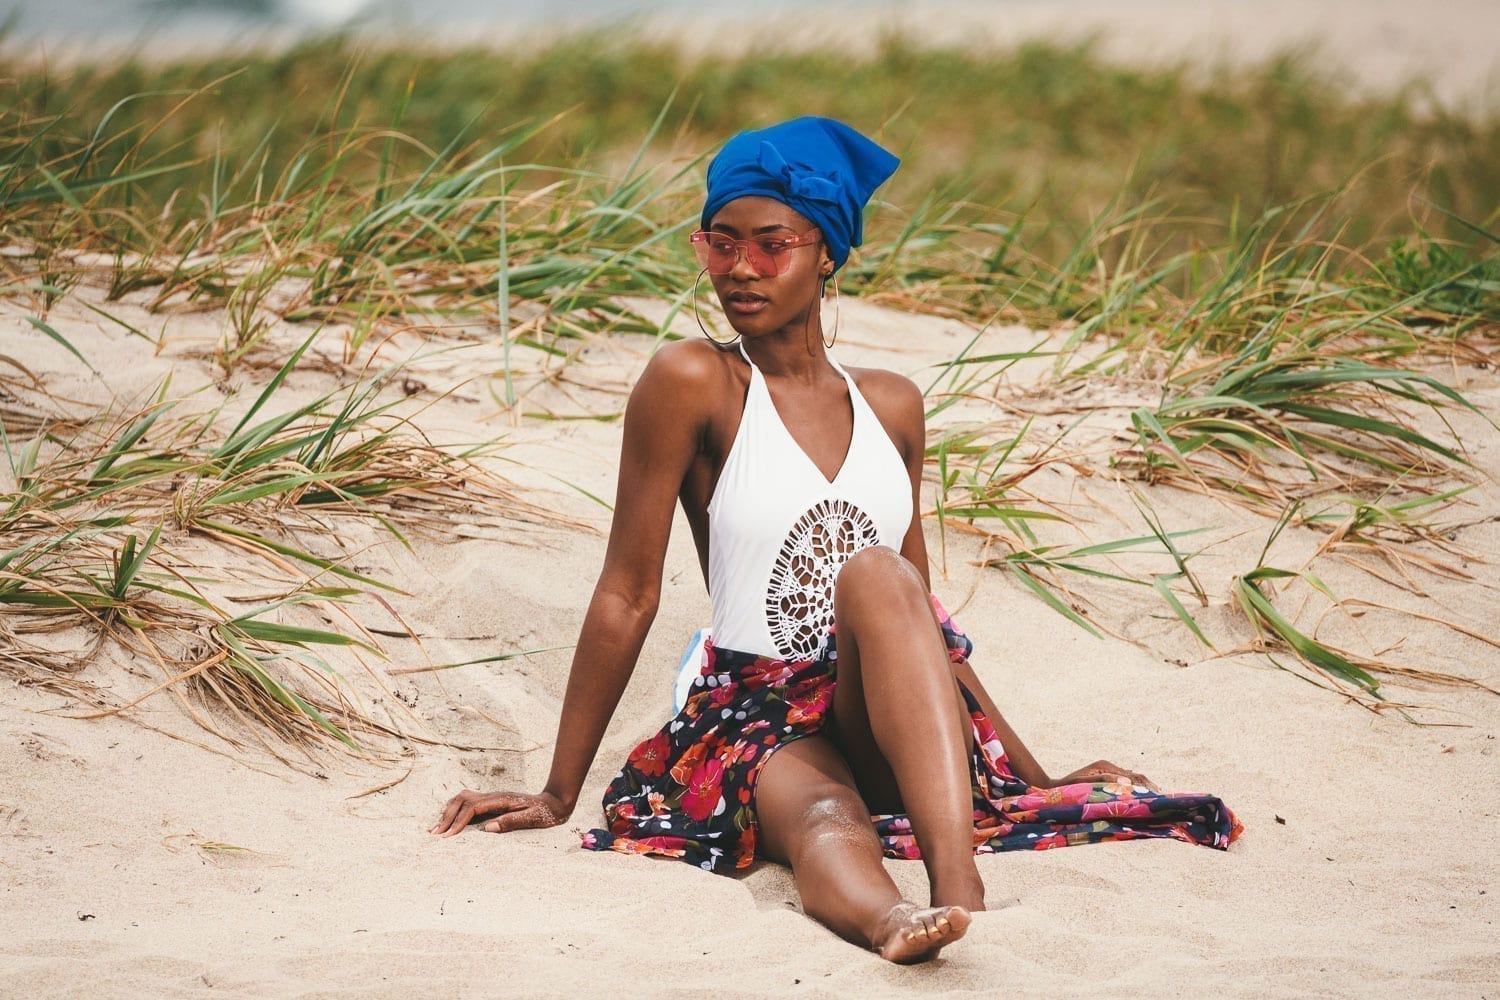 African American woman wearing a white bathing suit and blue head covering as well as pink sunglasses sitting in the sand looking off to the side